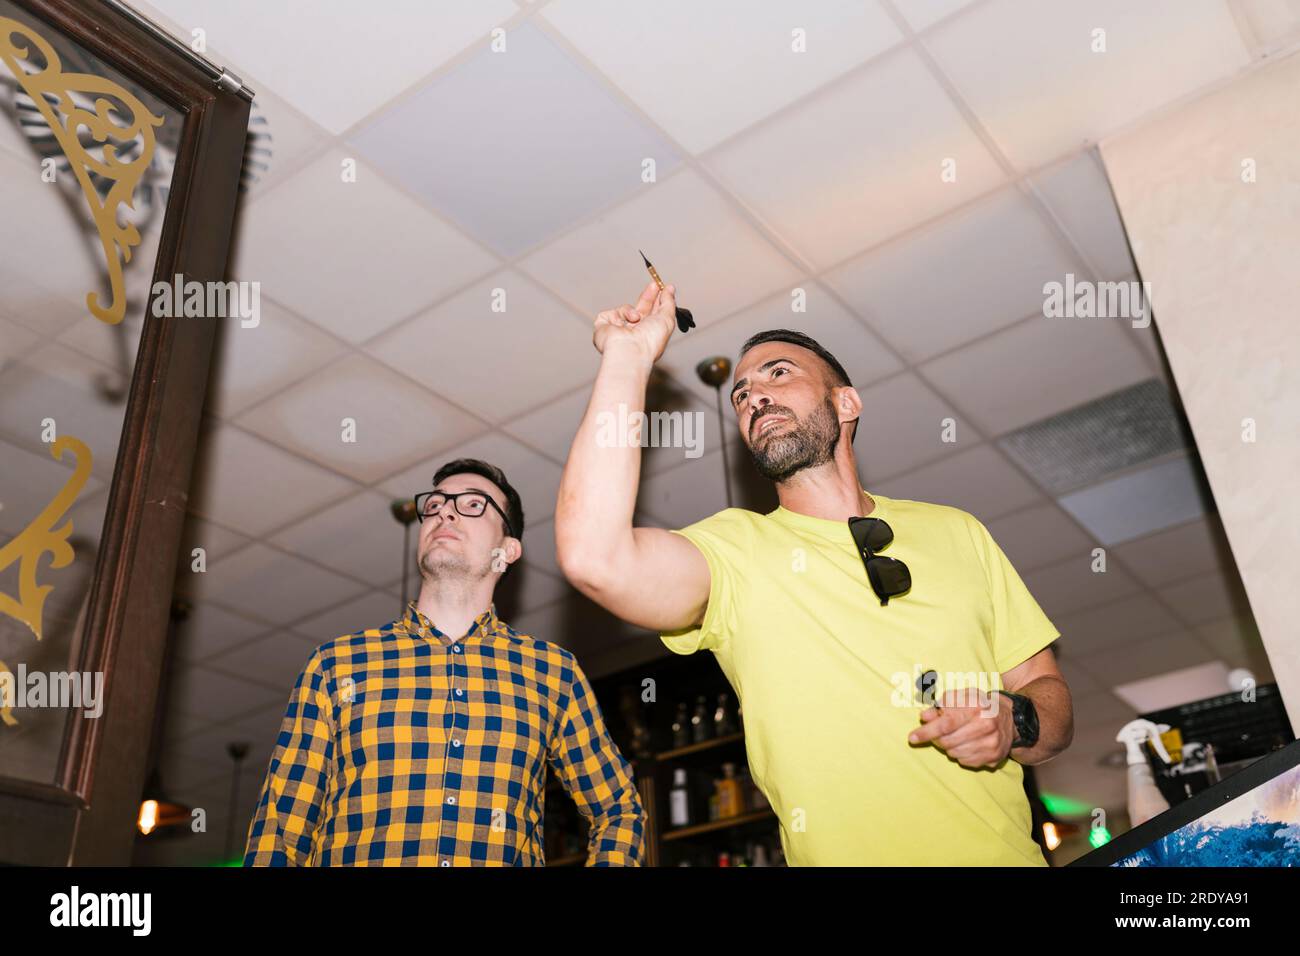 Man aiming dart on target standing next to friend at bar Stock Photo